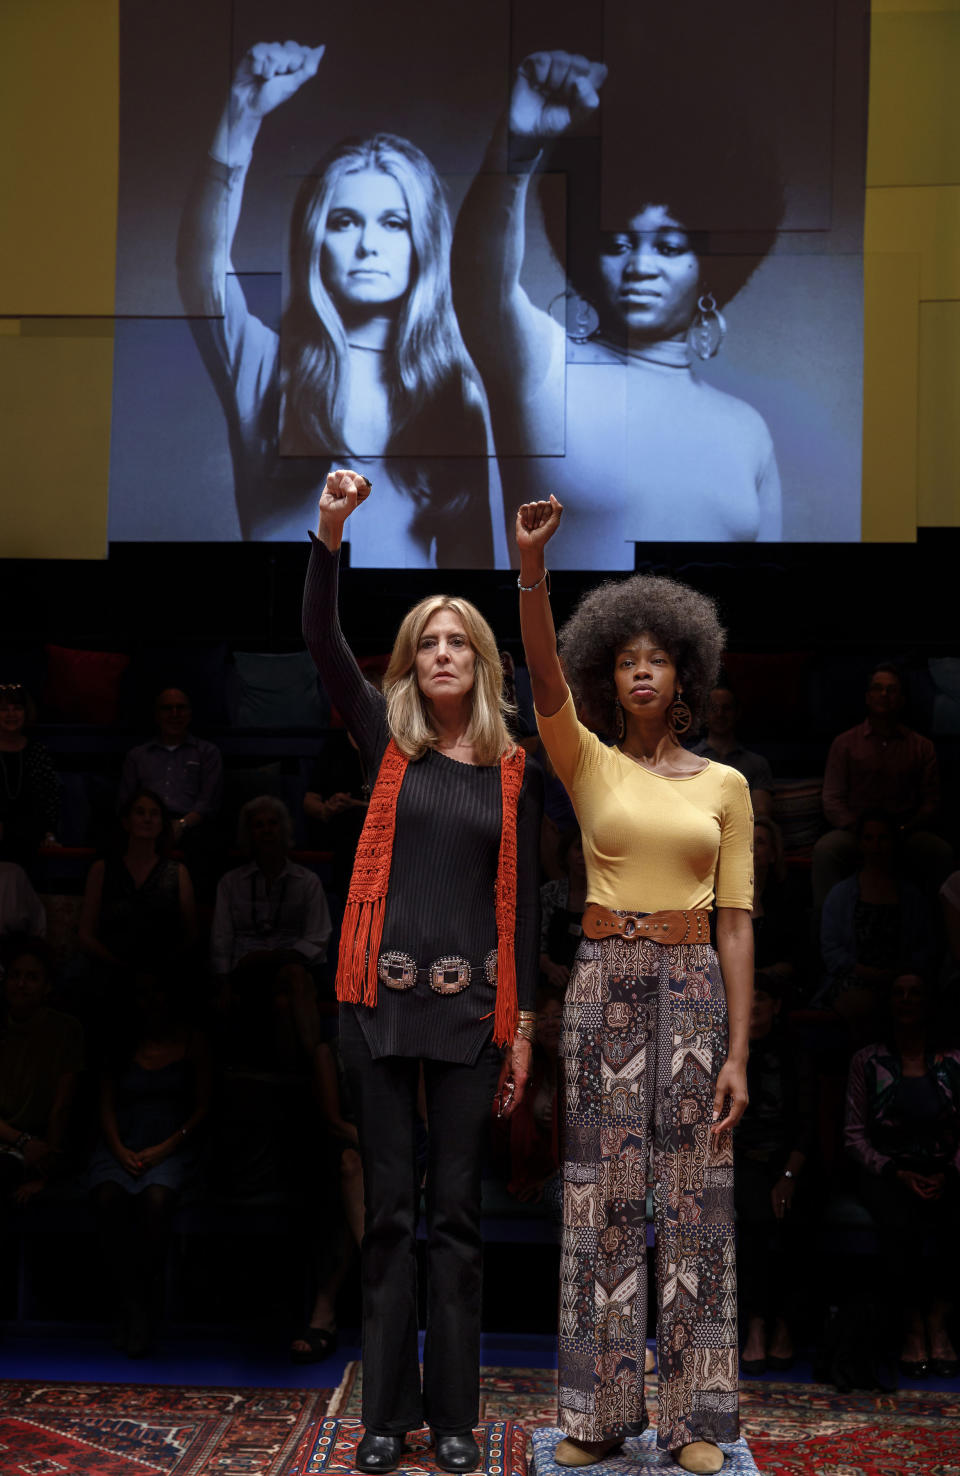 In this image released by PBS, Christine Lahti, portrays Gloria Steinem, left, and Fedna Jacquet portrays Dorothy Pitman Hughes in a scene from "Gloria - A Life." The taped theater production airs Friday on PBS. (Joan Marcus/PBS via AP)